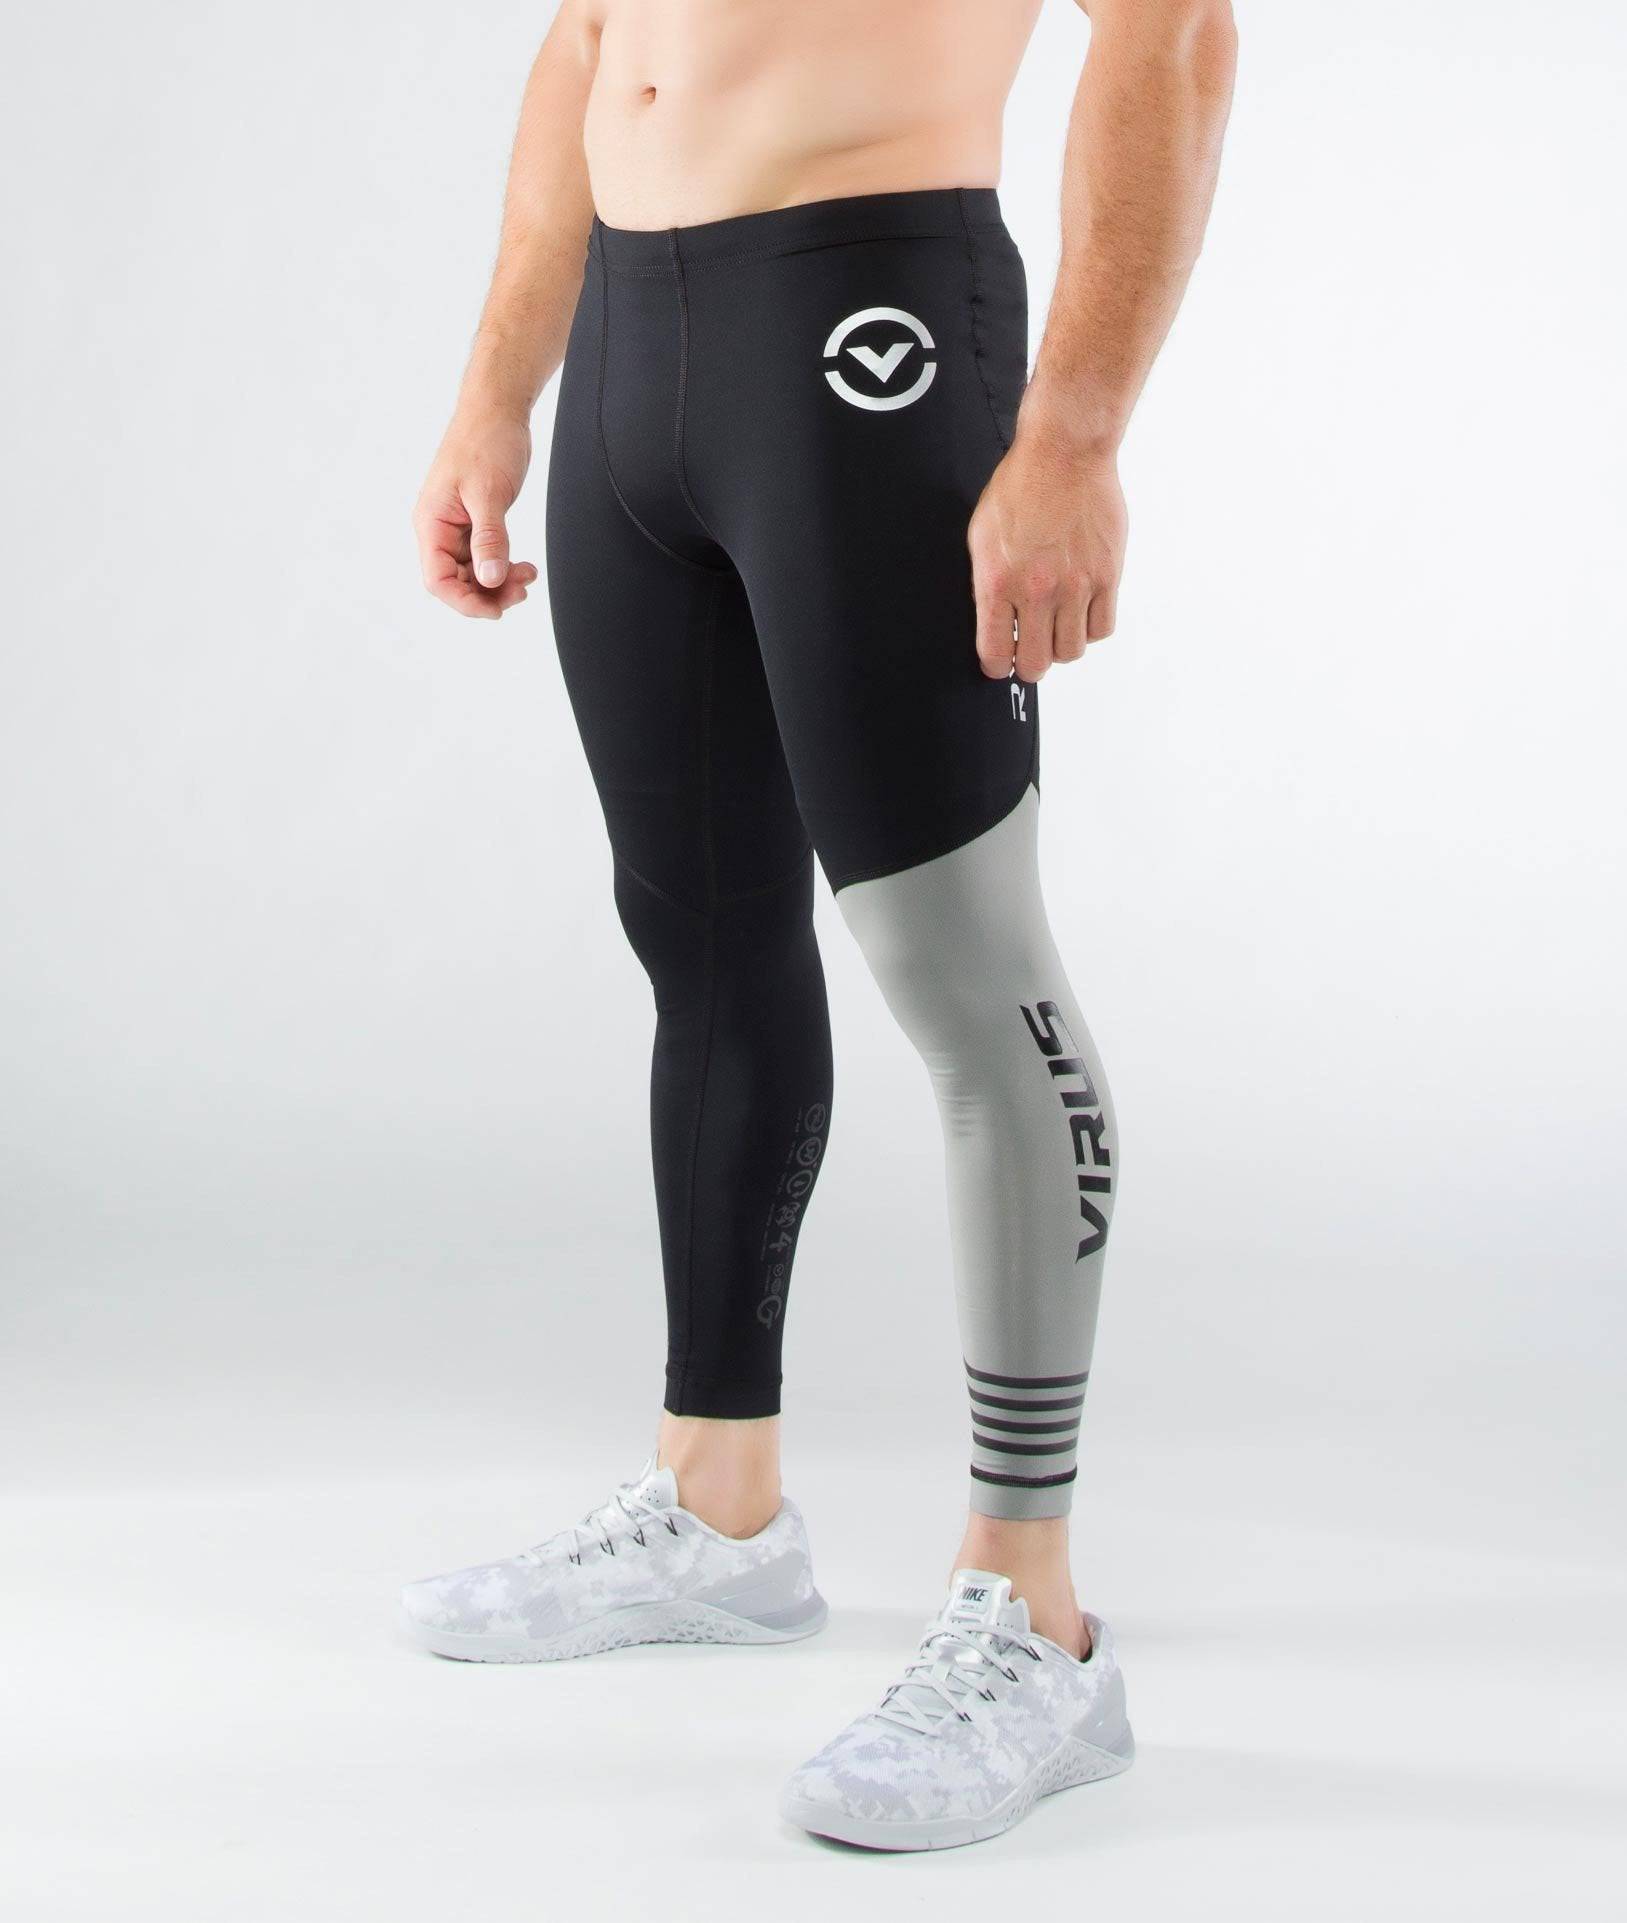 Virus | RX8 Stay Cool Compression Pants - XTC Fitness - Exercise Equipment Superstore - Canada - Pants